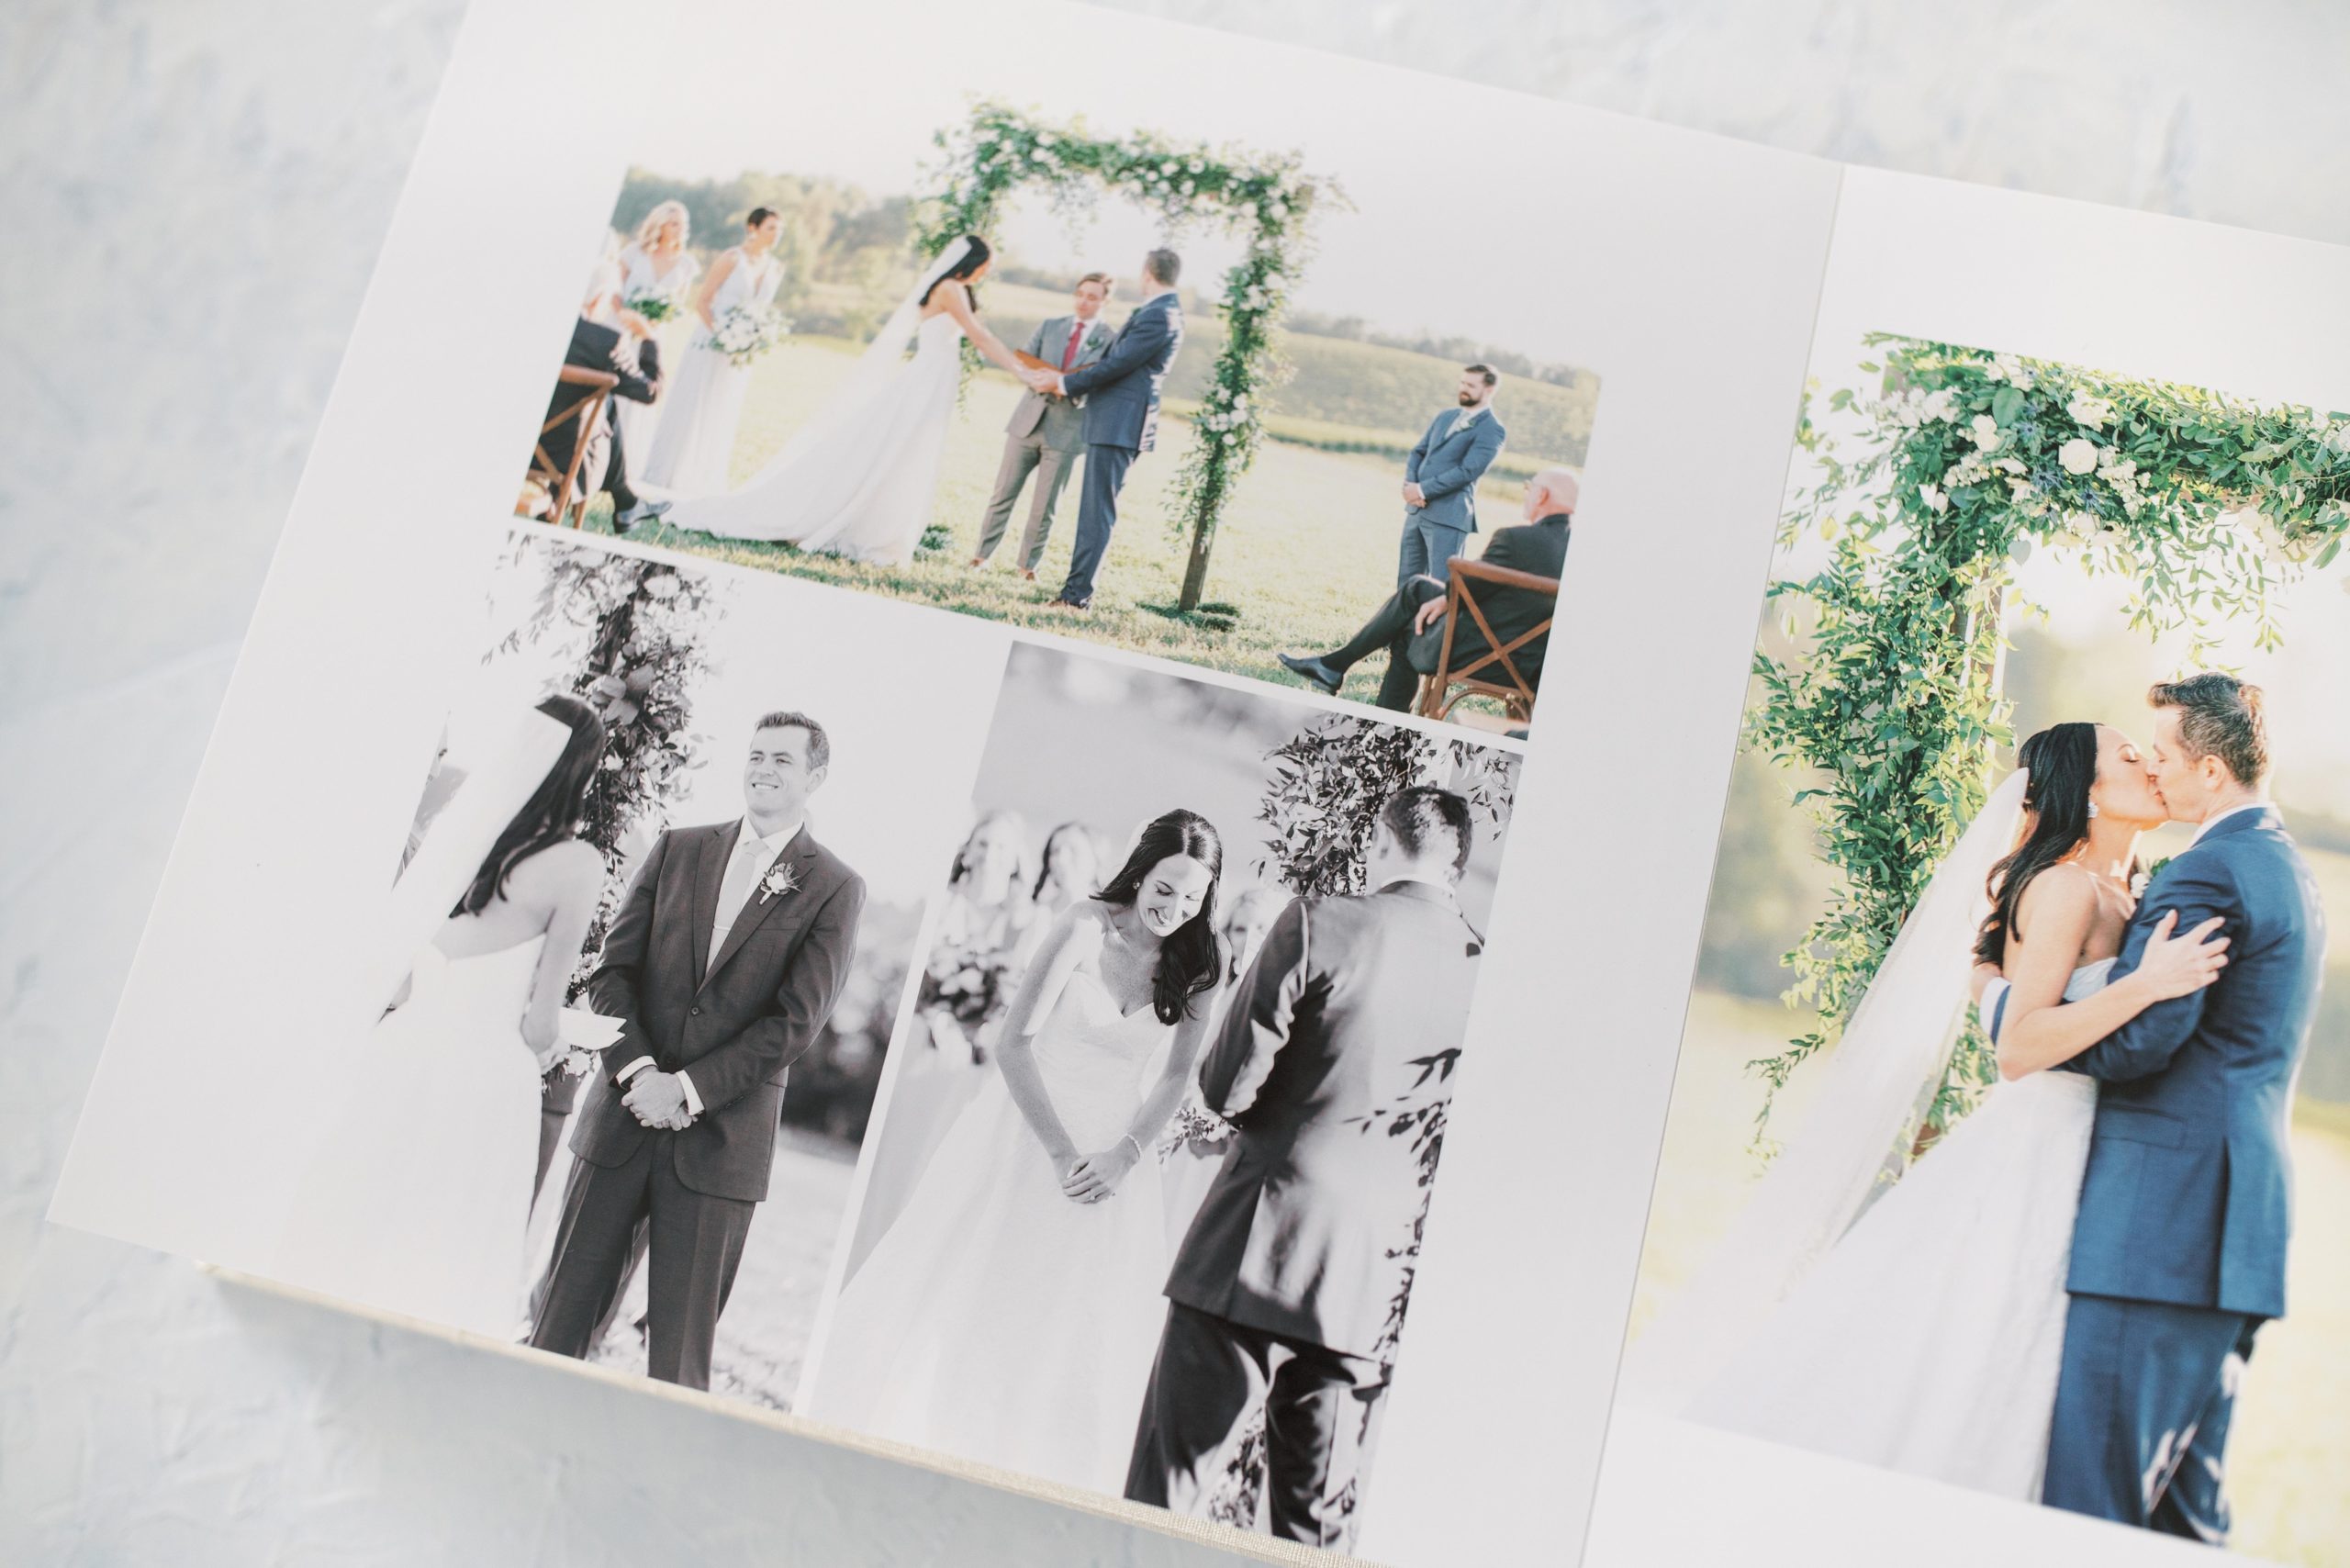 A stunning cream silk heirloom album from a beautiful outdoor wedding captured at Stone Tower Winery in Leesburg, VA.